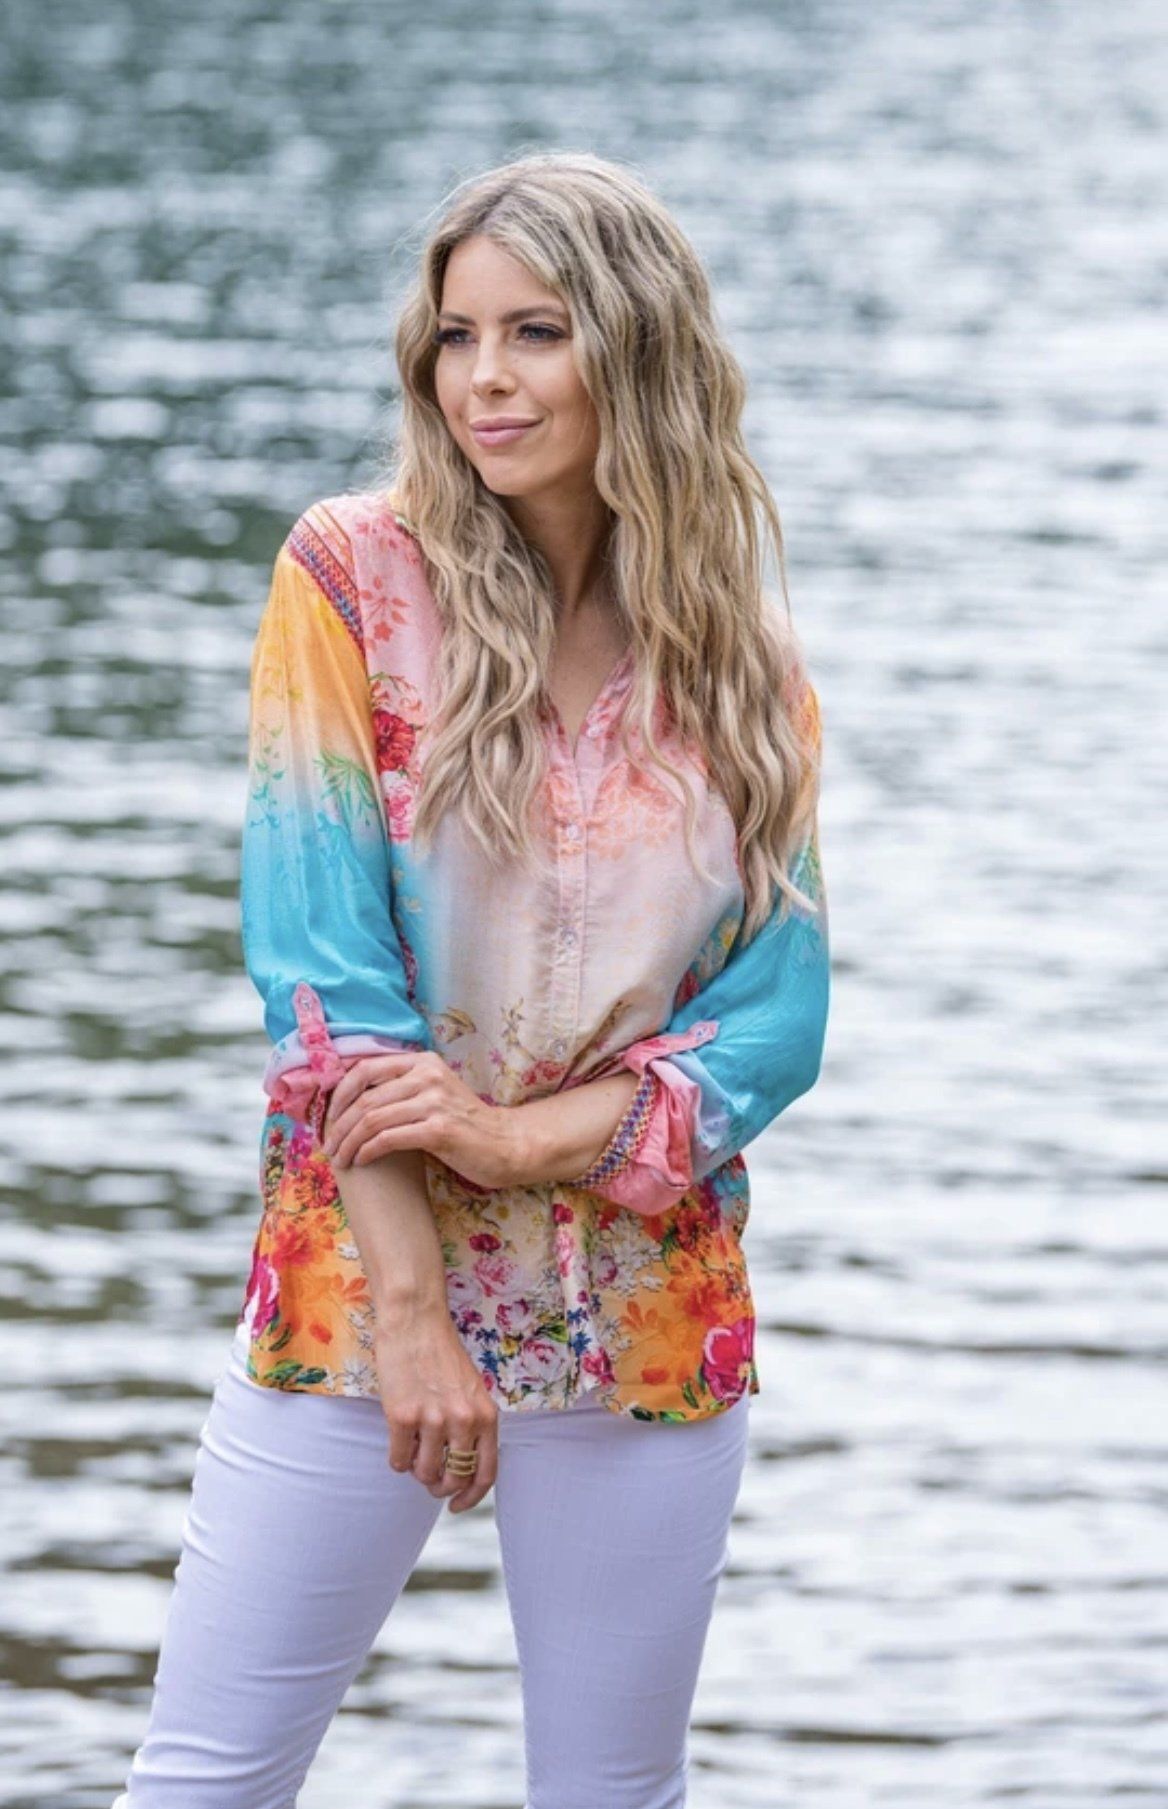 Aqua Sleeve Blush Floral Top with White Pants Model  — Clothing Boutique